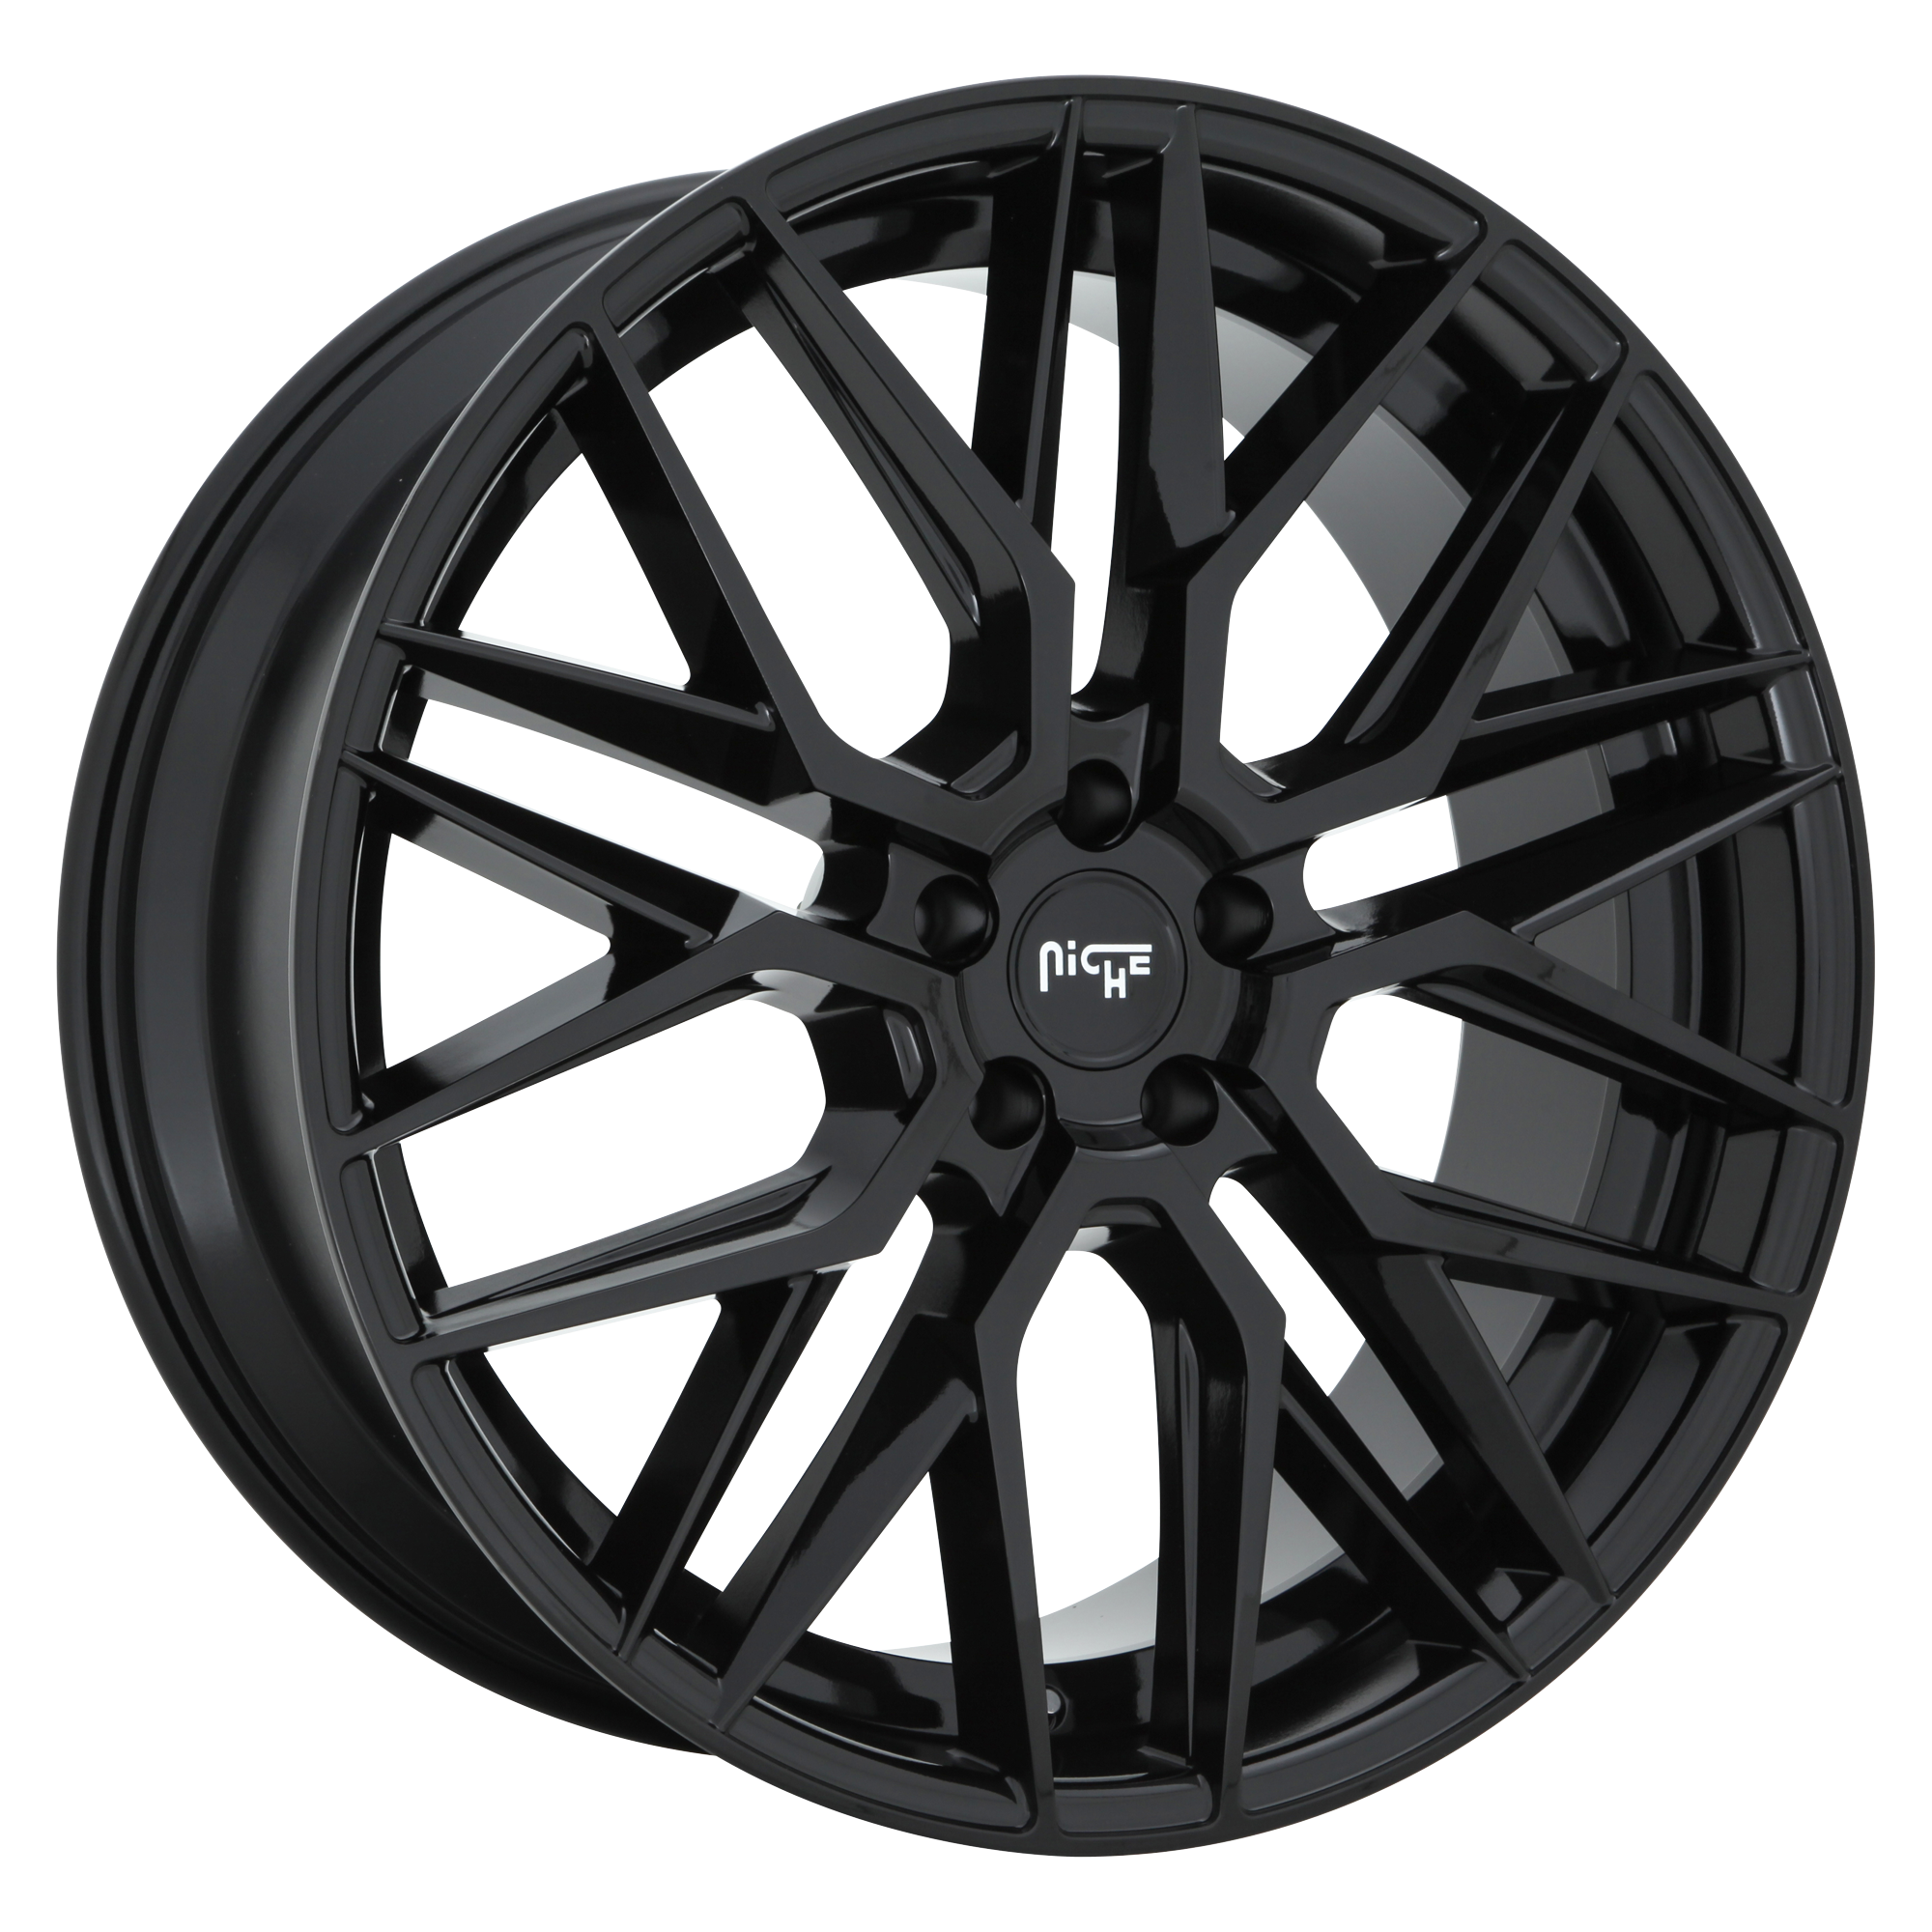 GAMMA 22x9 5x120.00 GLOSS BLACK (38 mm) - Tires and Engine Performance